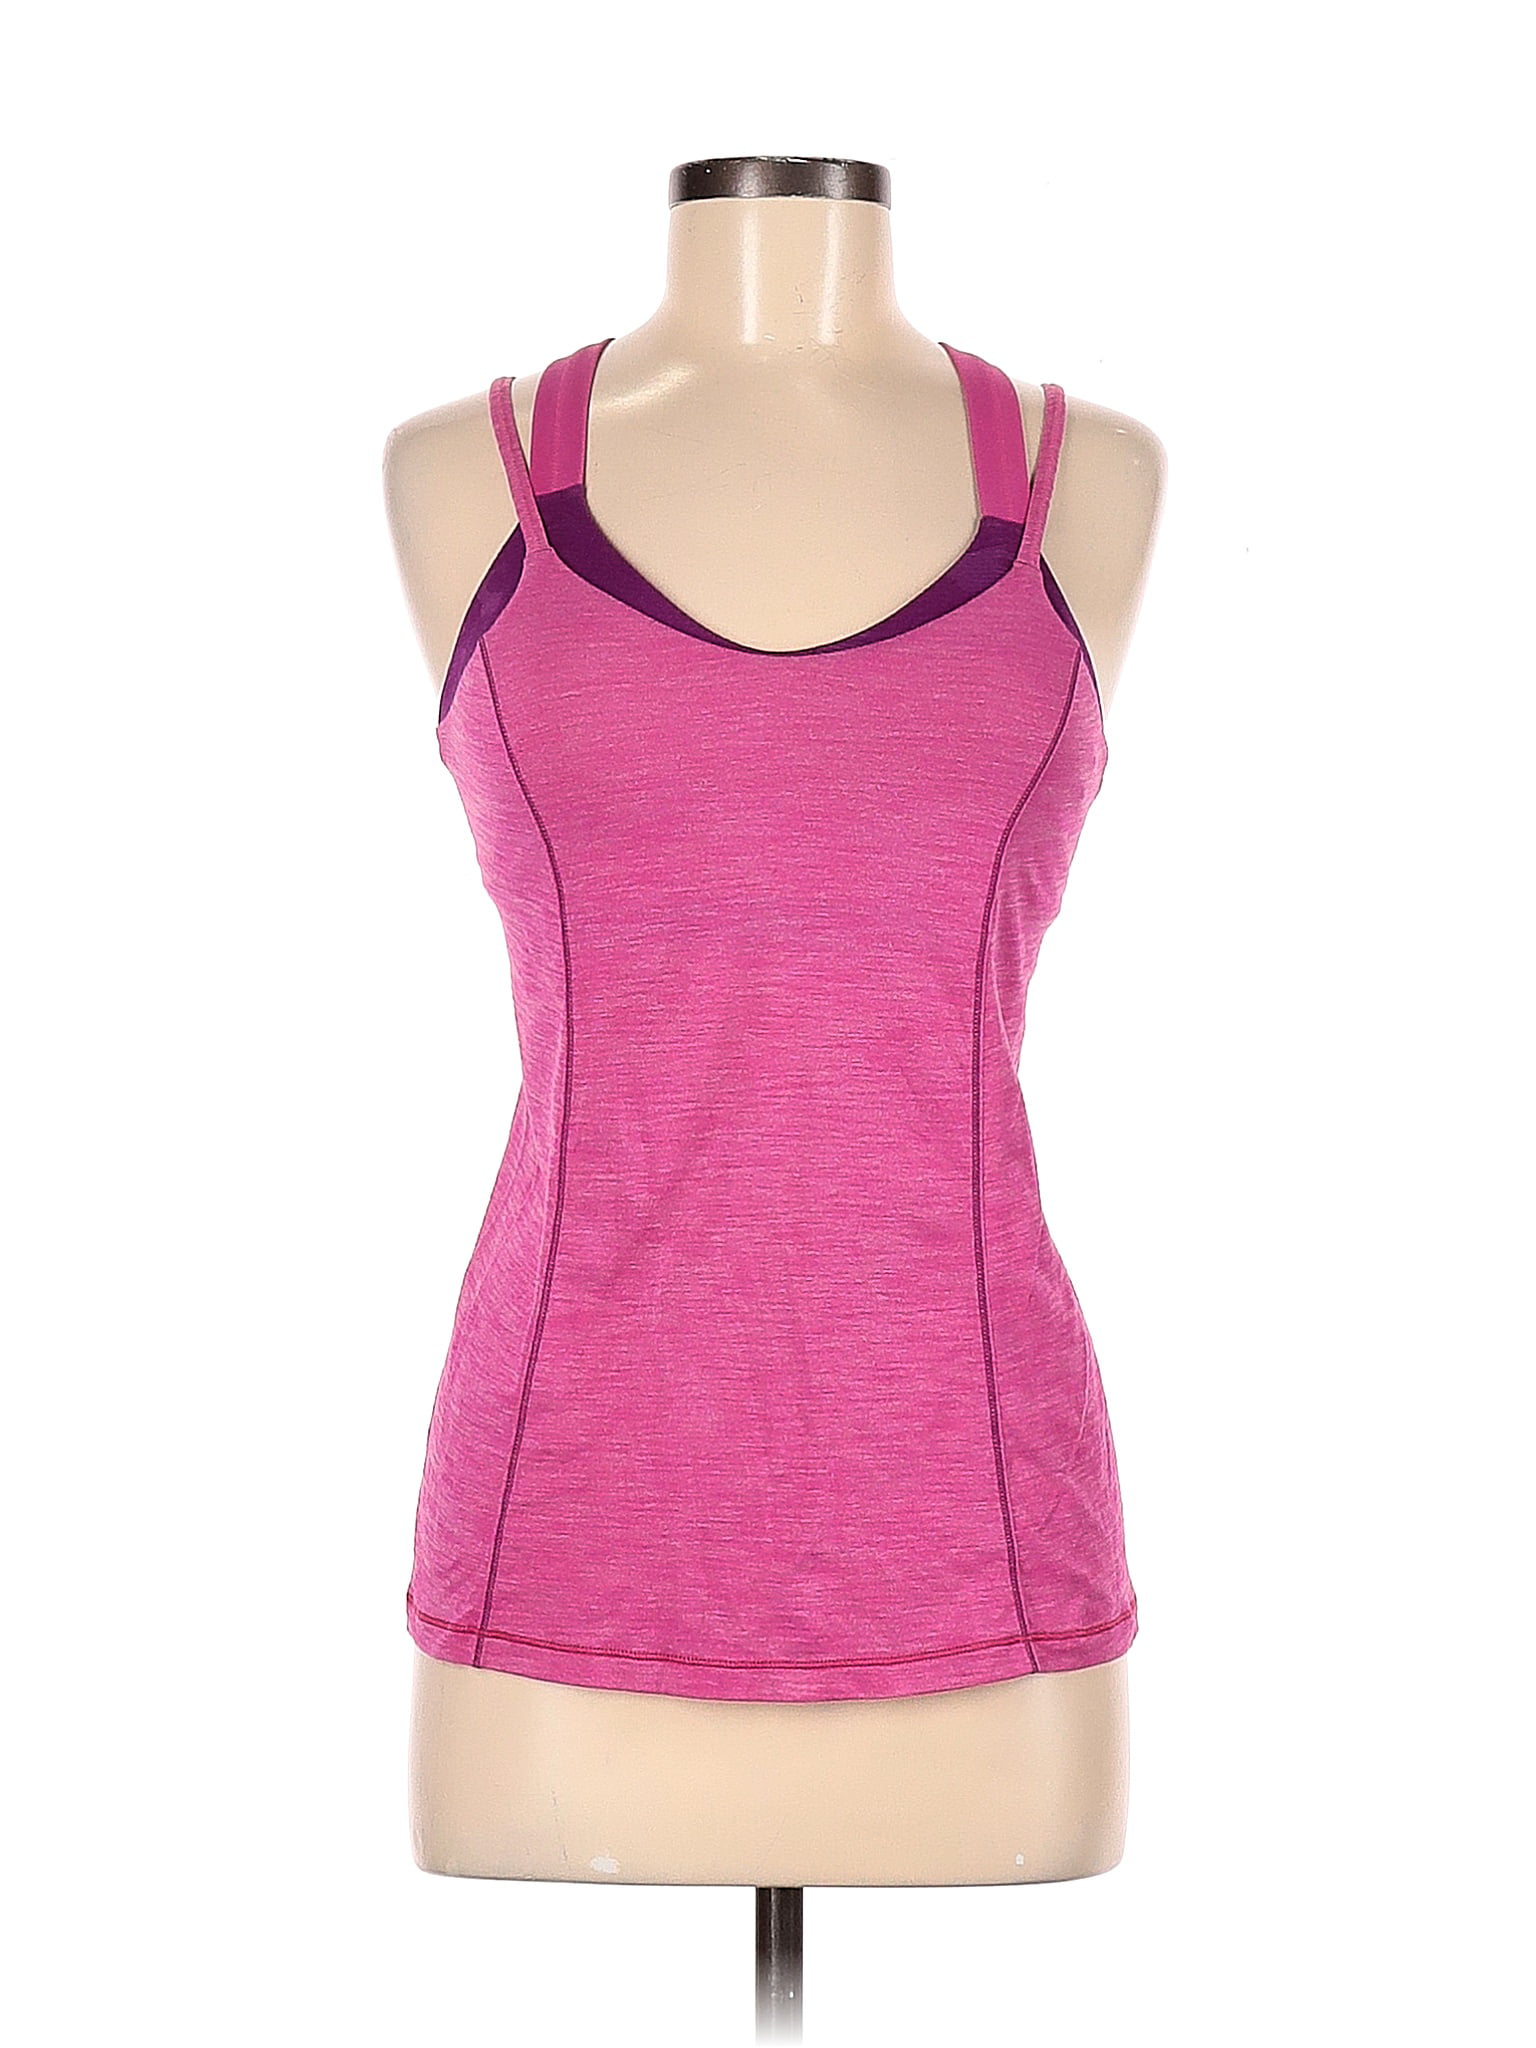 Pre-Owned Lululemon Athletica Womens Size 8 Active Togo